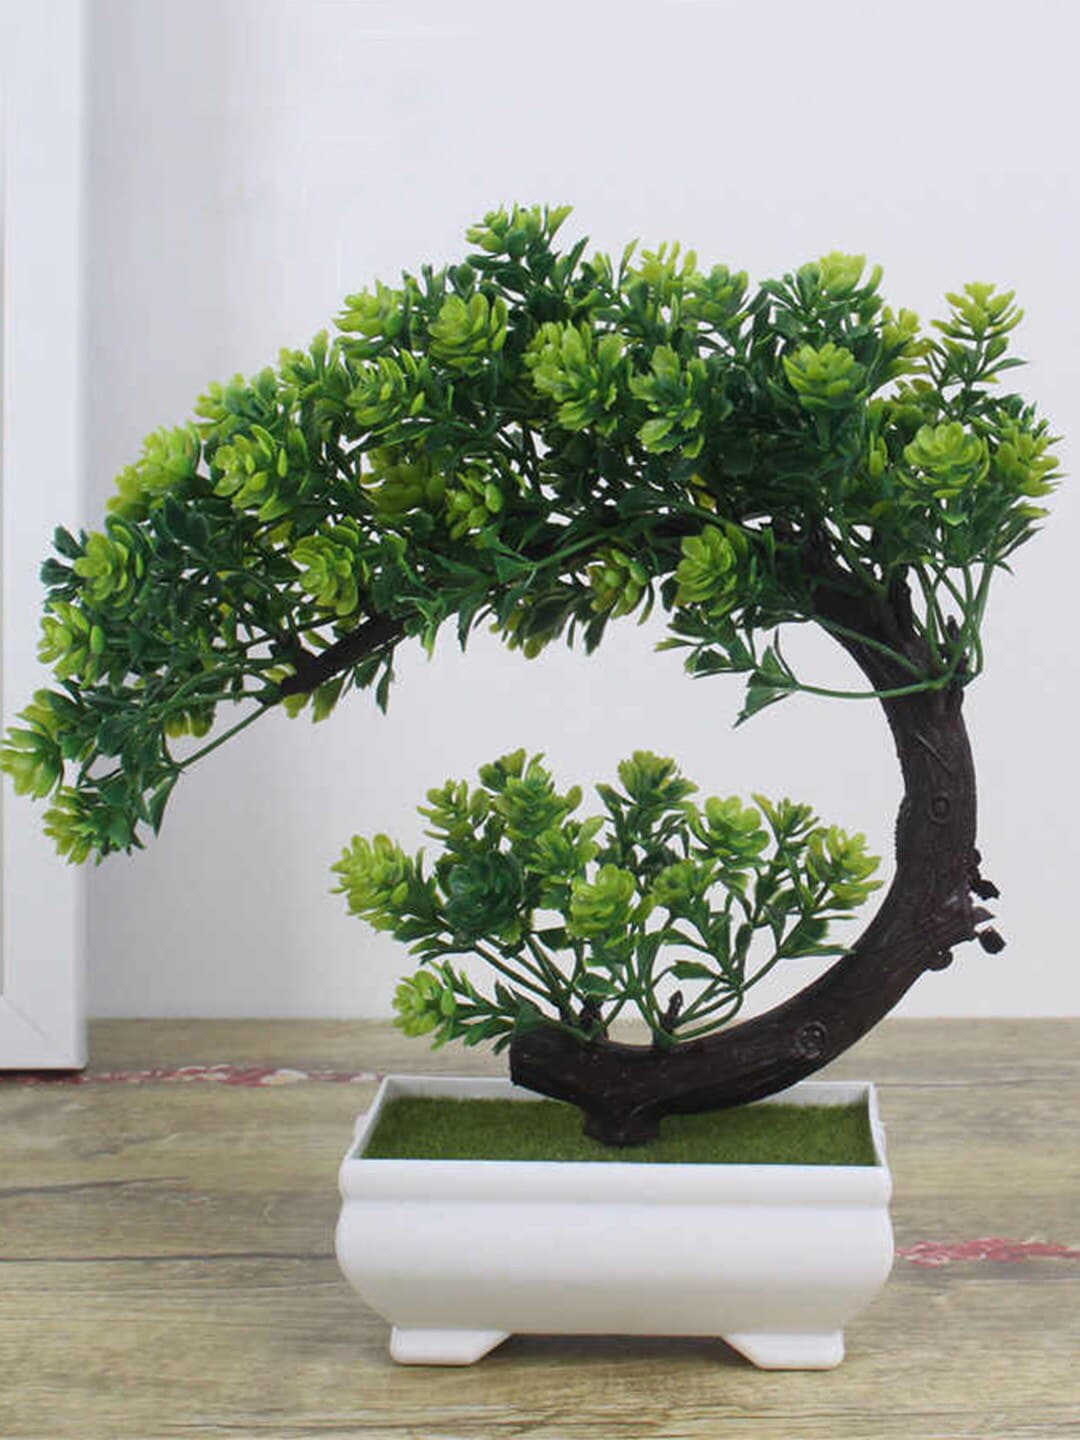 TIED RIBBONS Green & White Artificial Bonsai Tree Plant with Pot Price in India